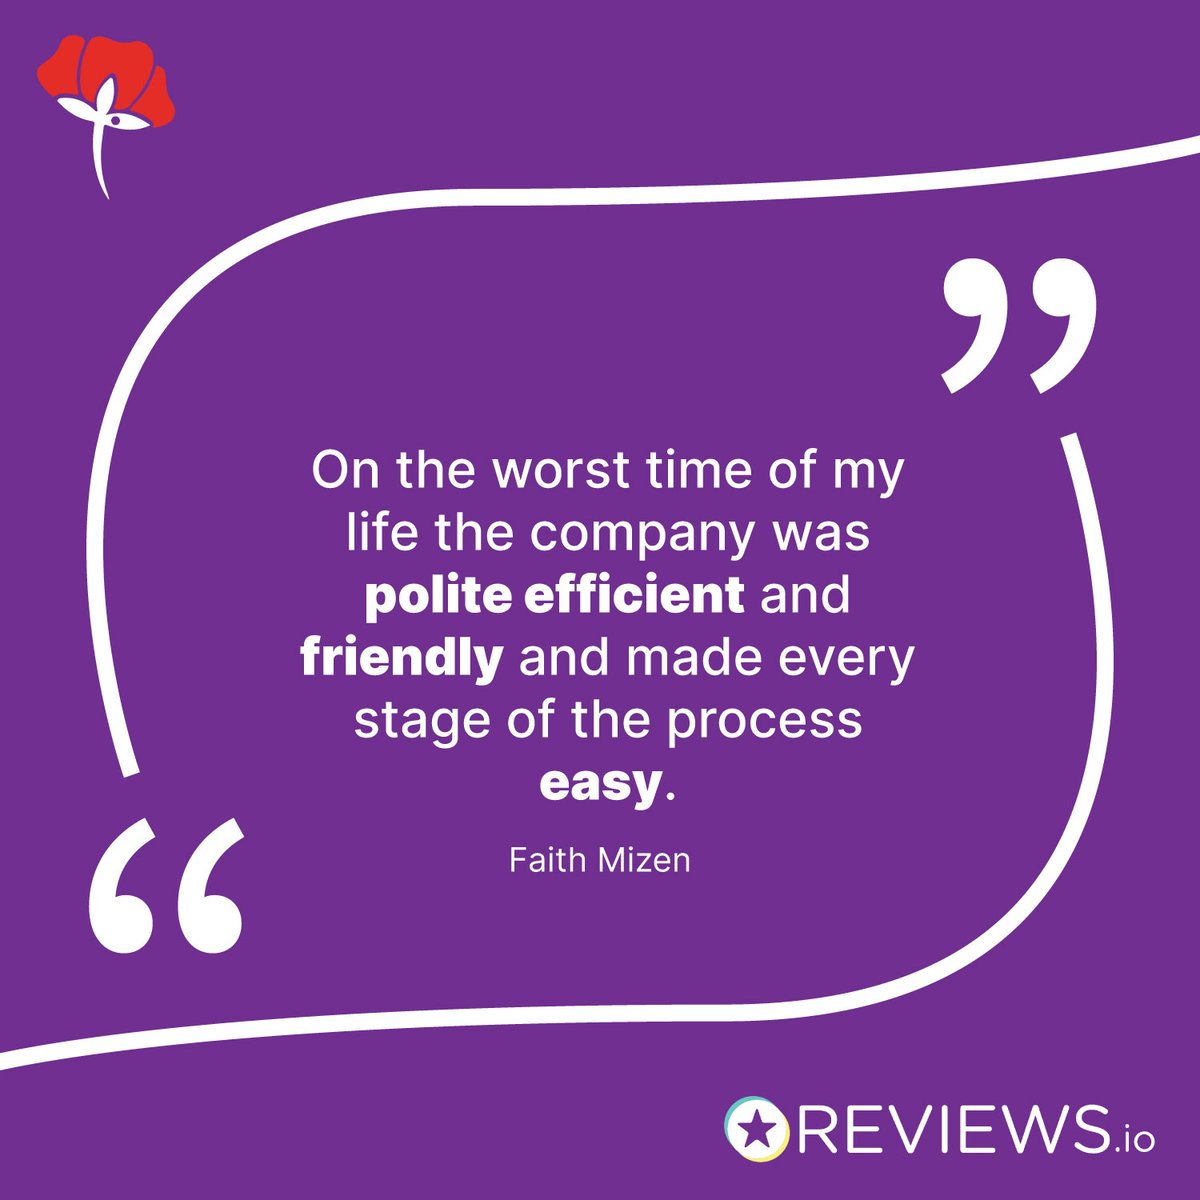 We are pleased that our team were able to provide the support you needed at this time, thank you for these words. If you would like to read more reviews, visit our Reviews.IO page - reviews.co.uk/company.../sto… #PureCremationReview